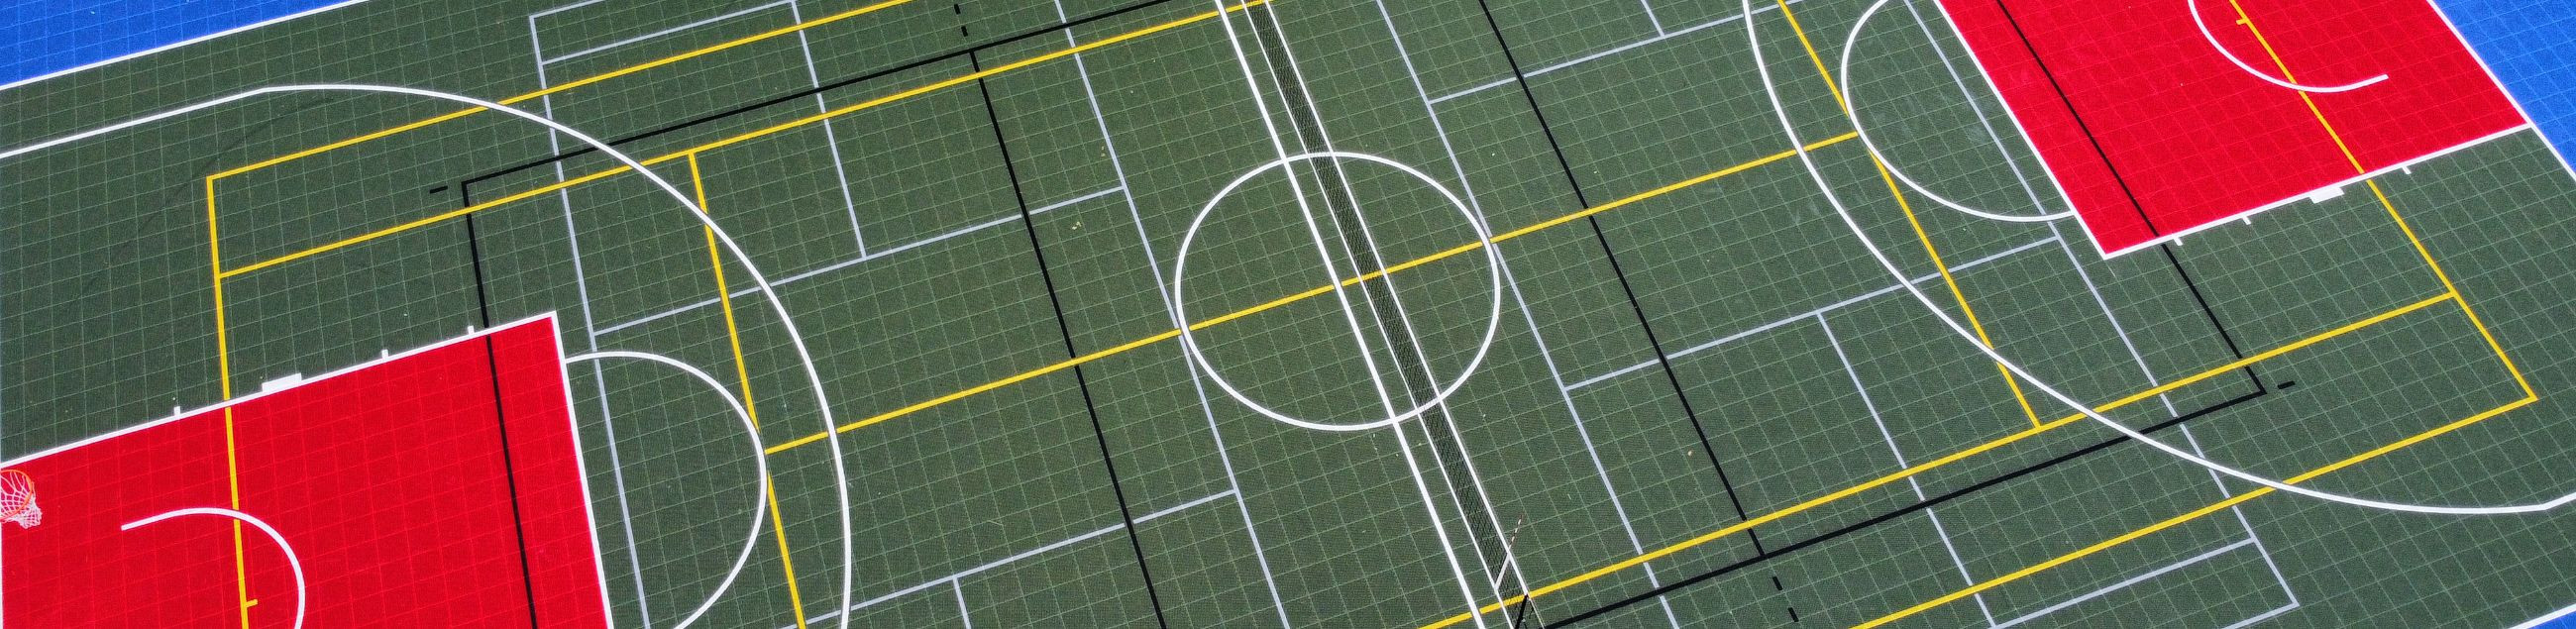 Special construction works, sport courts construction, sport surfaces, Coatings, Installation, Construction of fences, plastic tiles, Sport Court PowerGame Plus, hybrid clay courts, lines marking